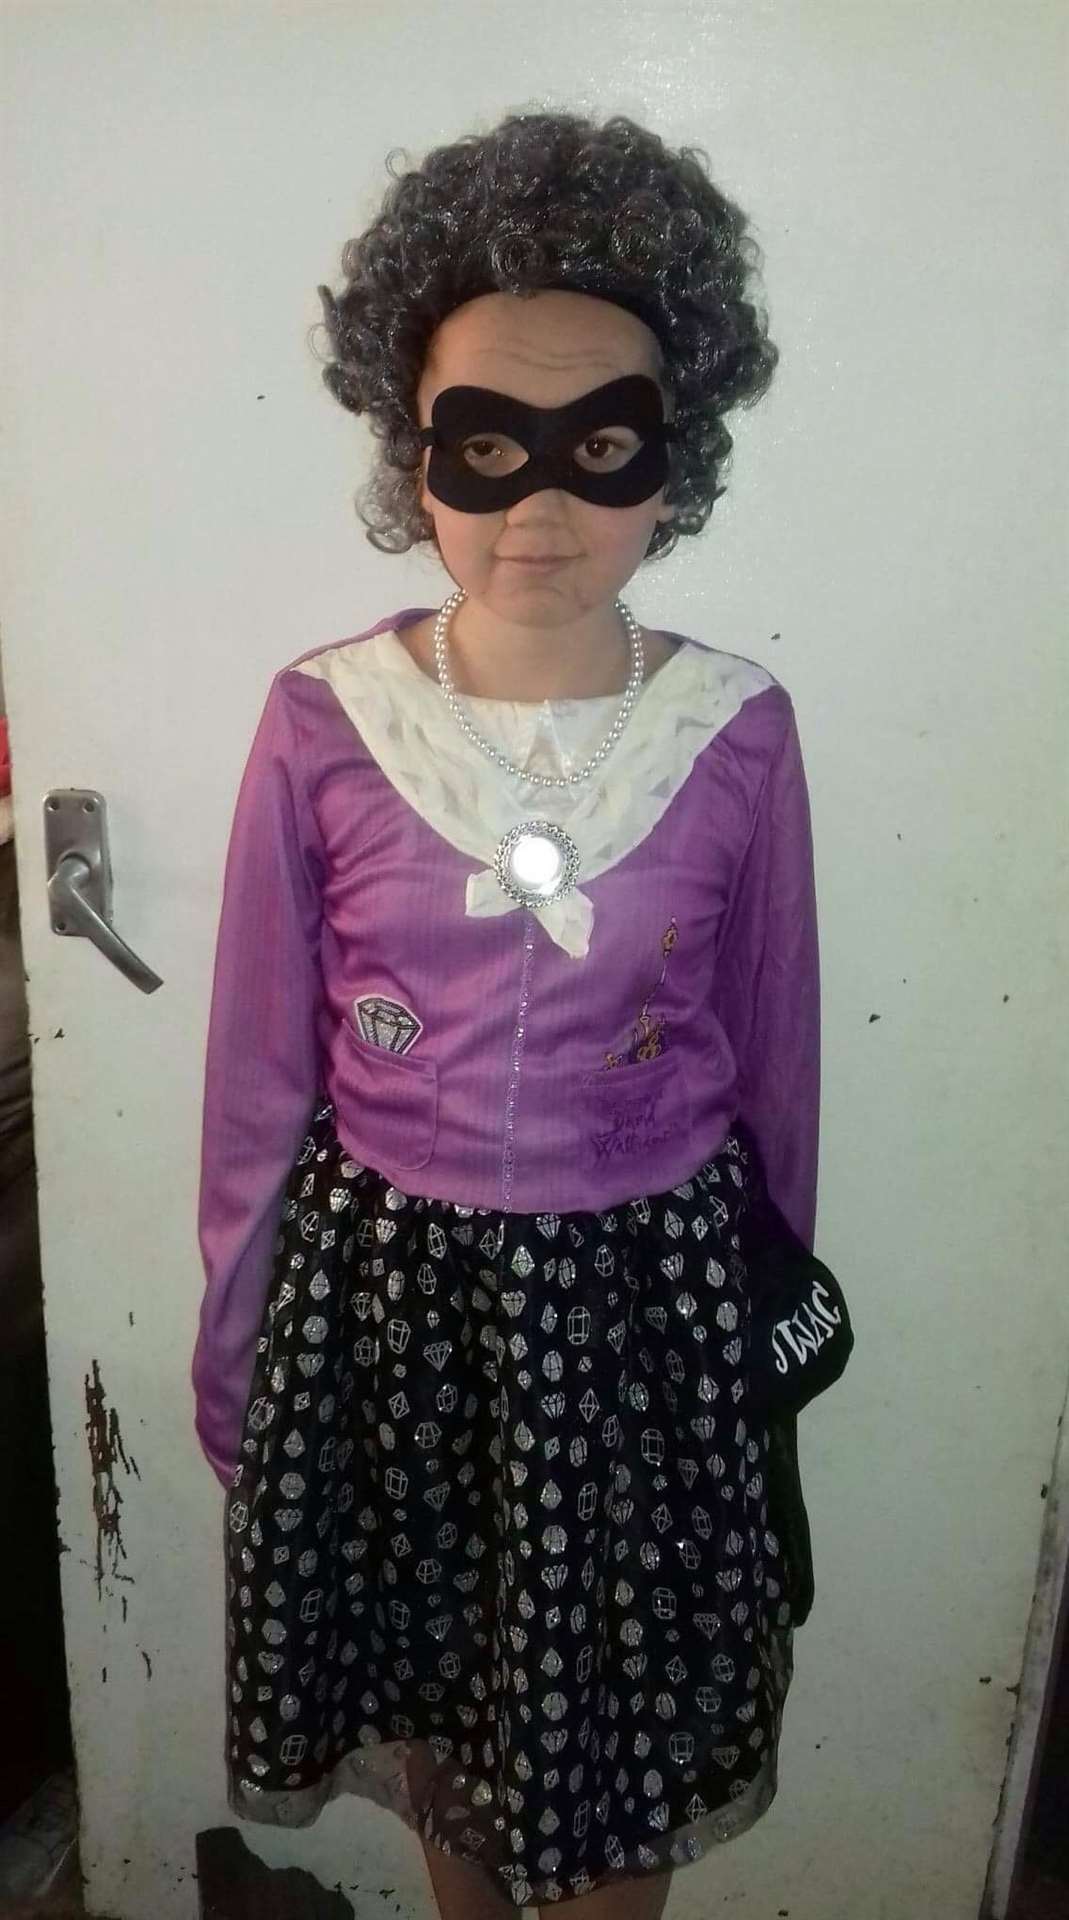 Chantelle Healey of Barnsole Primary School, in Gillingham as Gangster Granny